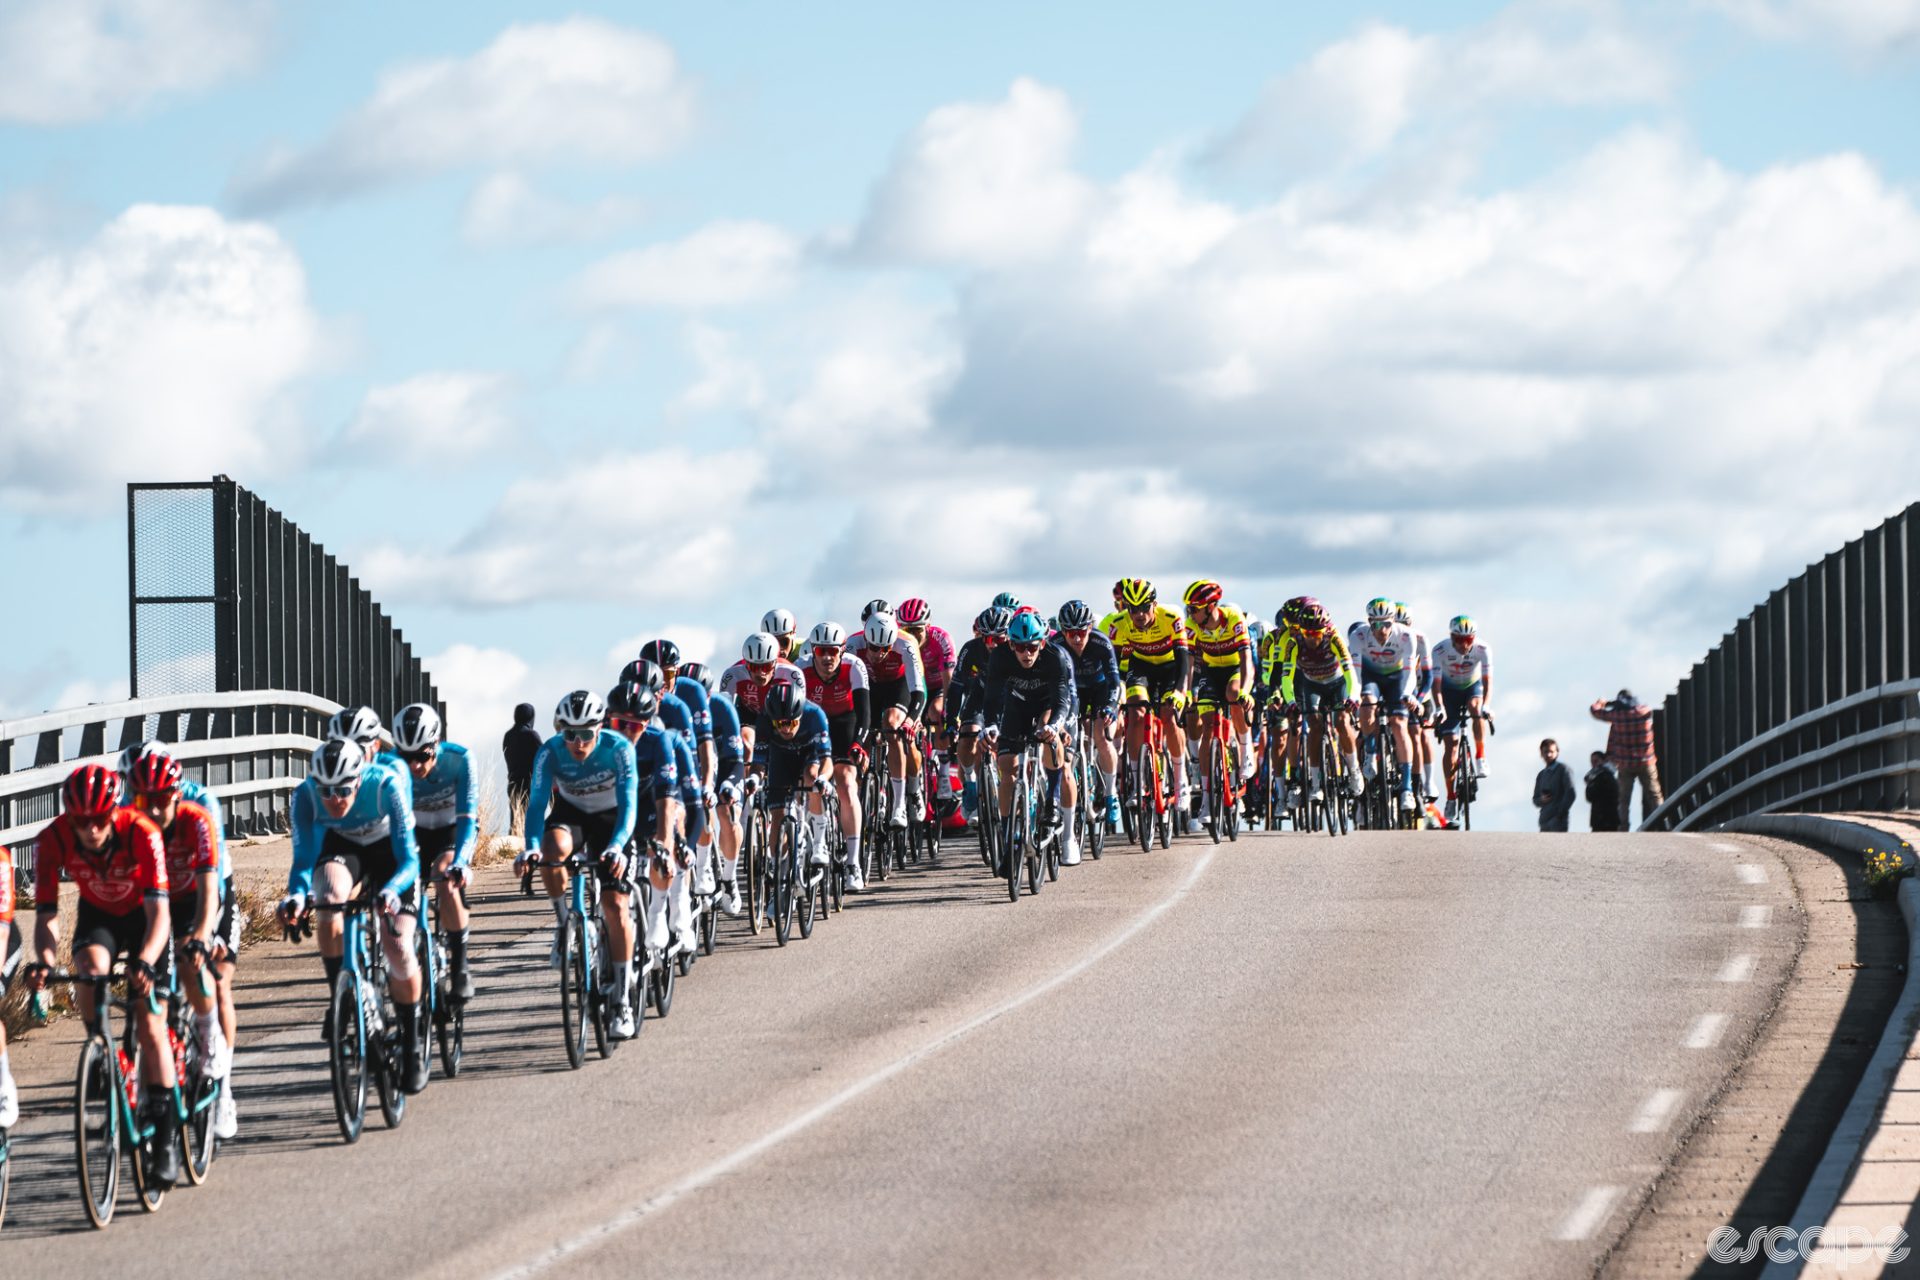 The pack crosses an overpass in the Tour de la Provence. The group is finally riding on dry roads under the sun but is strung out from the pace and crosswinds.